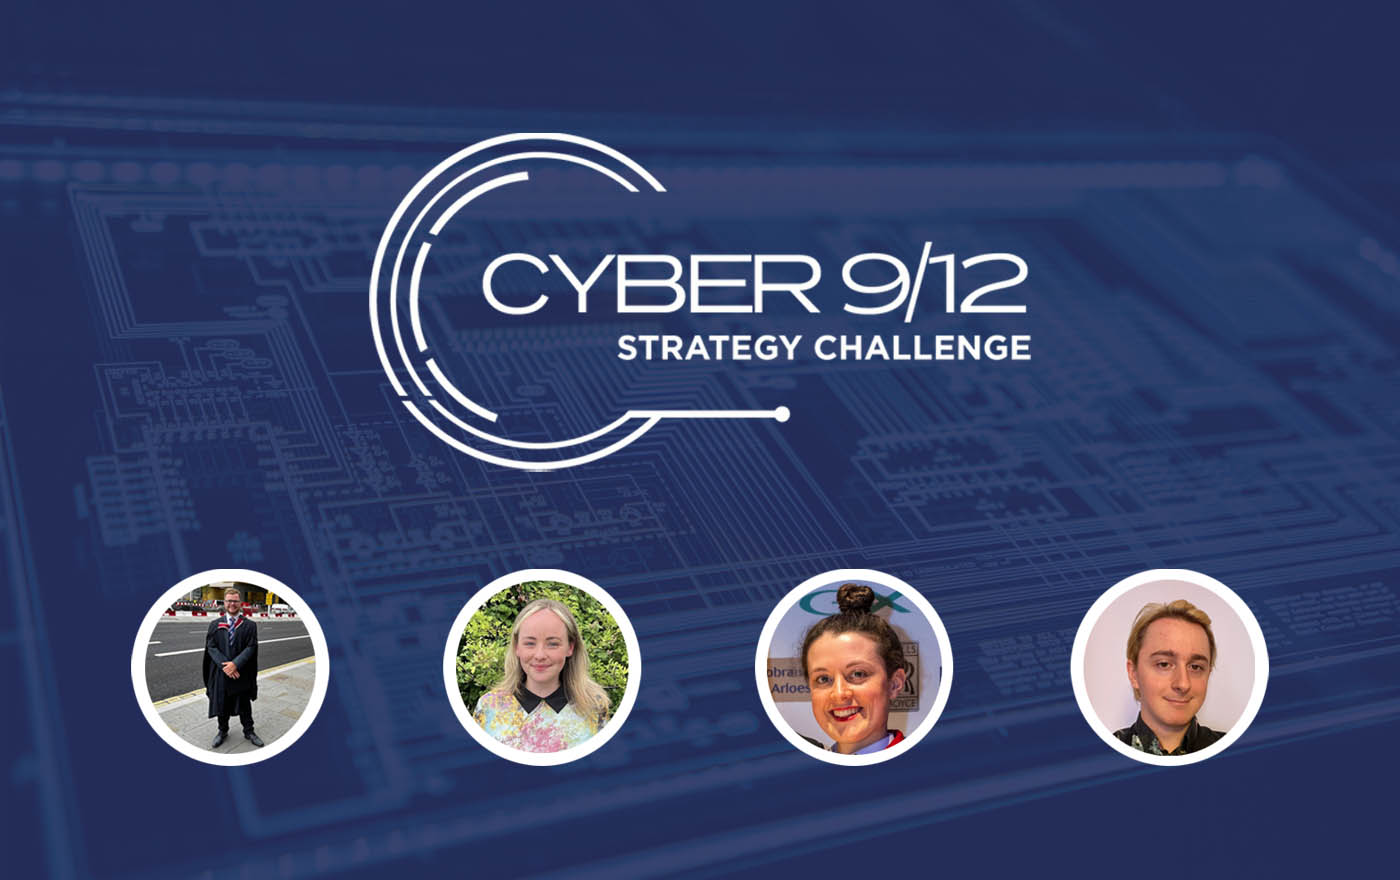 Swansea Student Team Reaches Cyber 9/12 Competition Finals